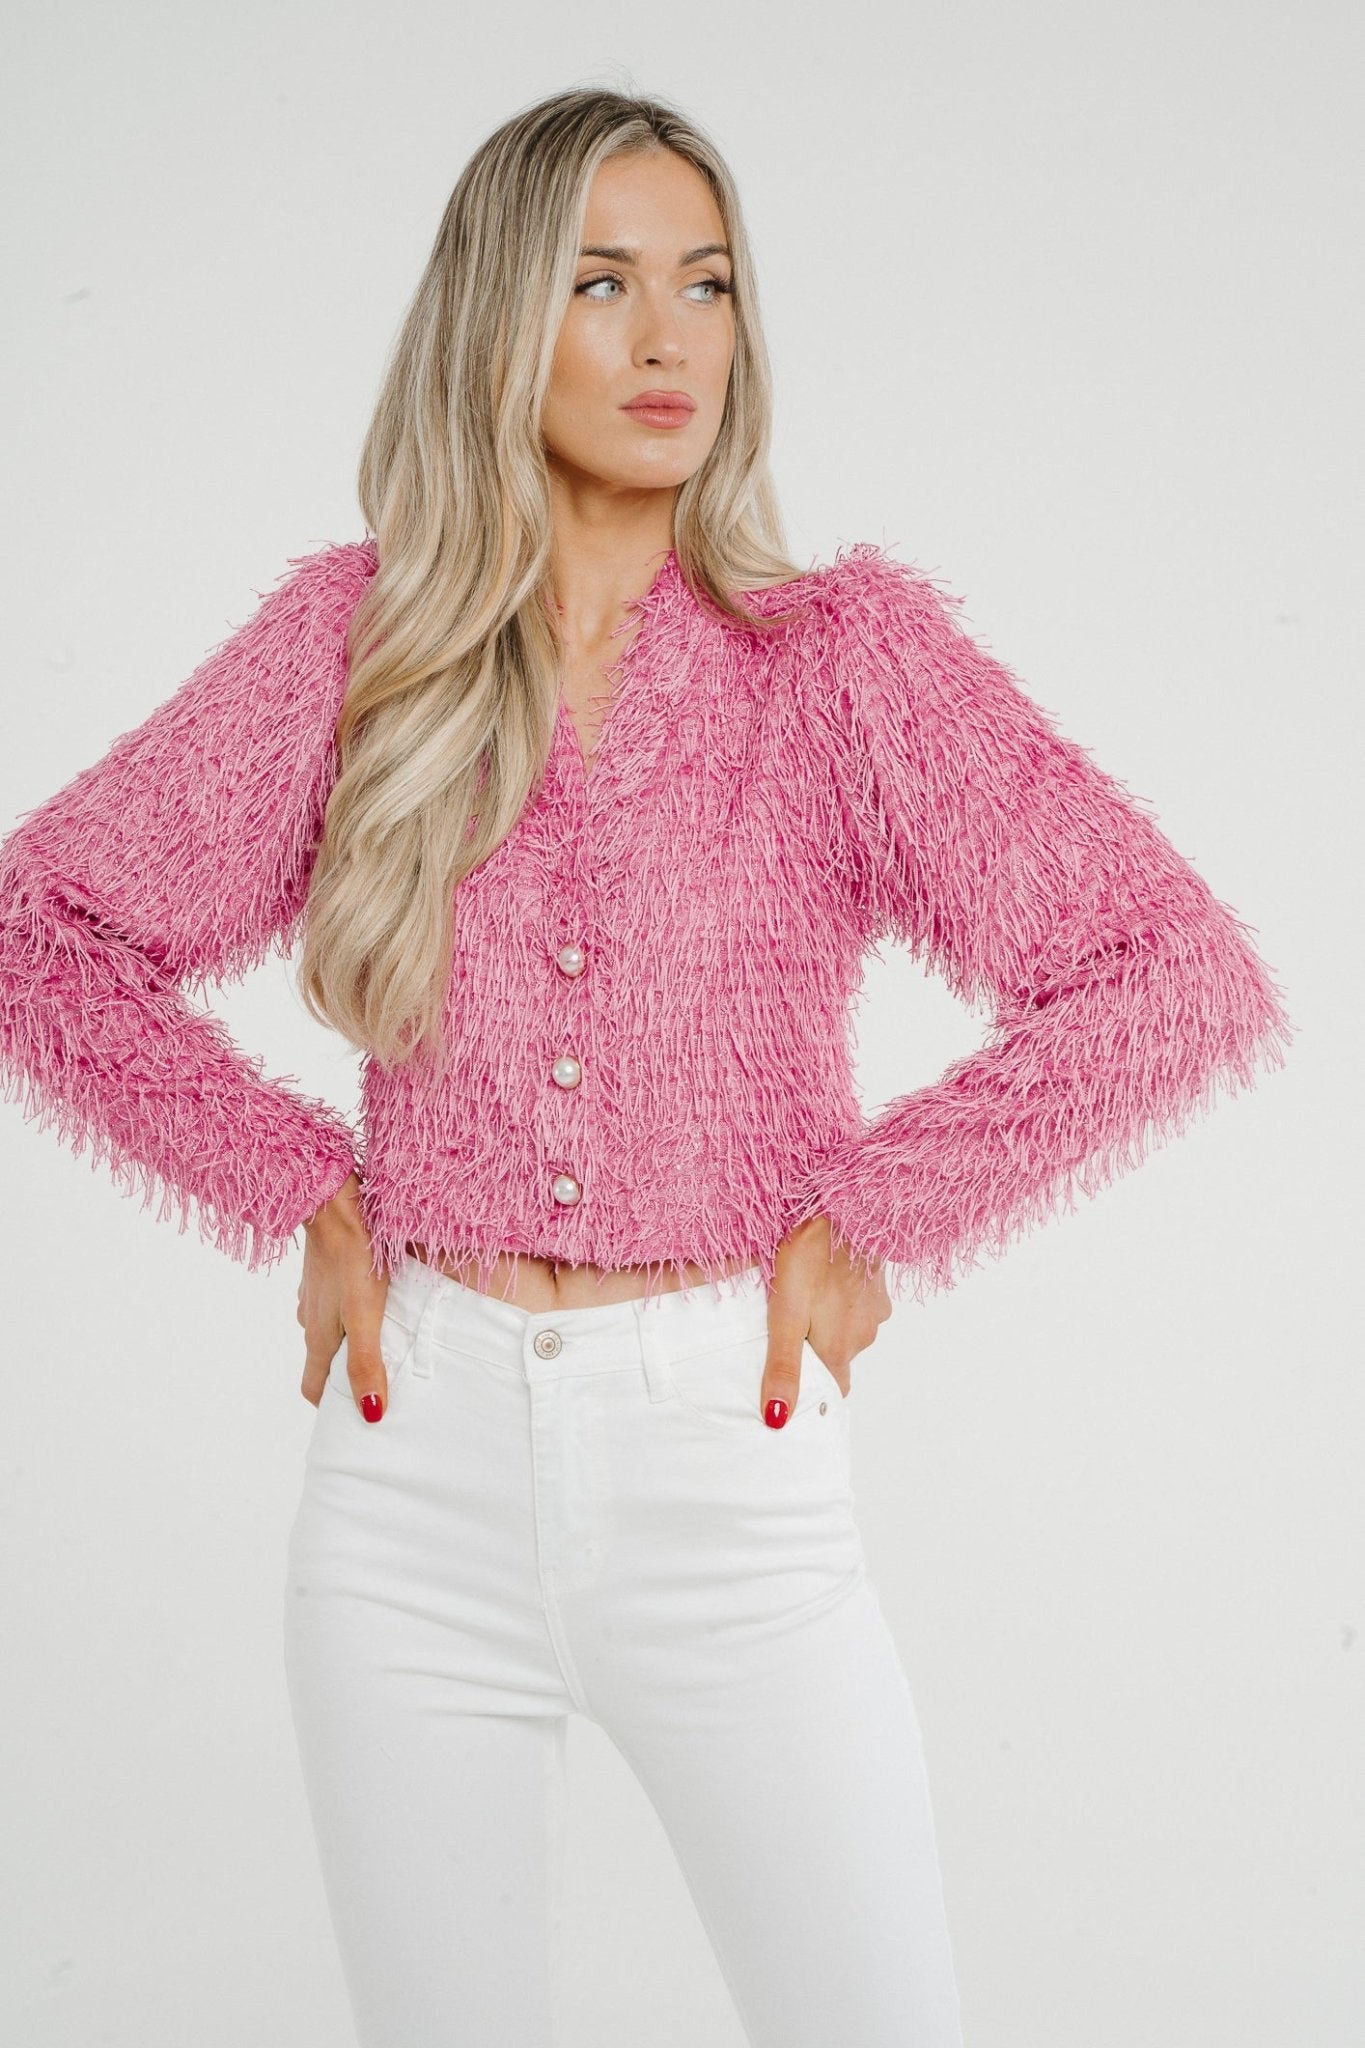 Polly Textured Jacket In Pink - The Walk in Wardrobe